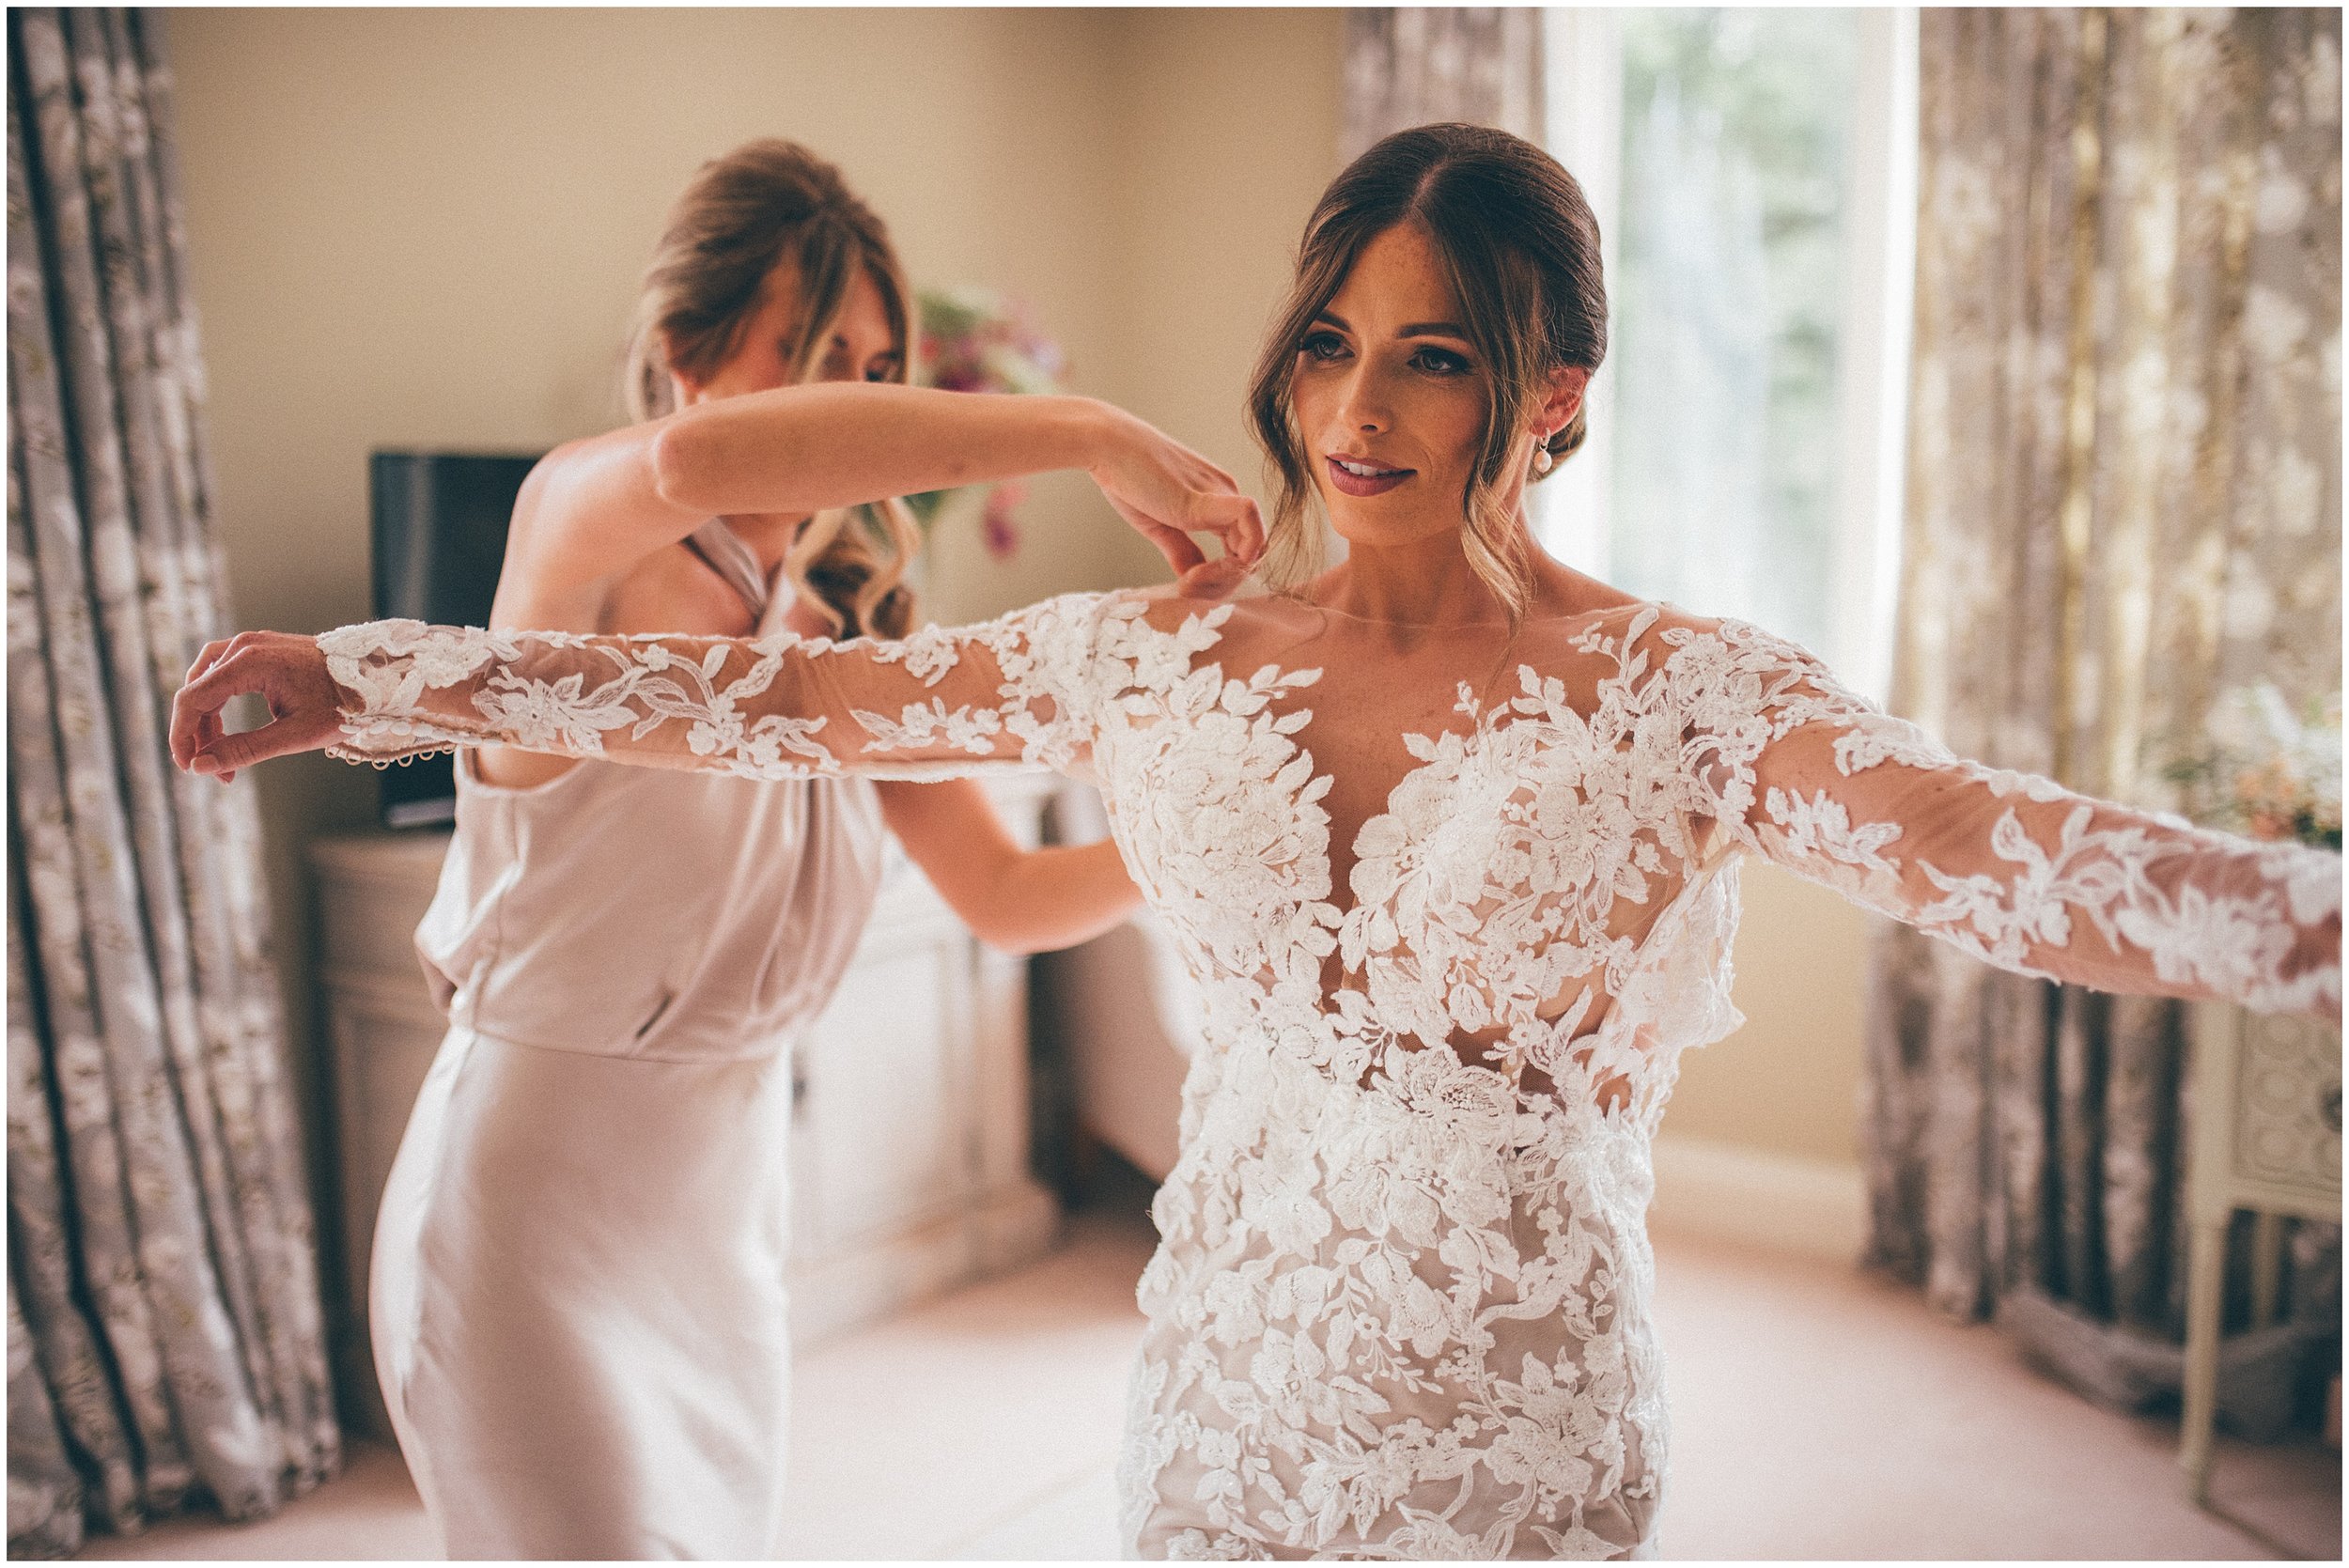 Bride gets ready for her wedding at Abbeywood Estate in Delamere, Cheshire